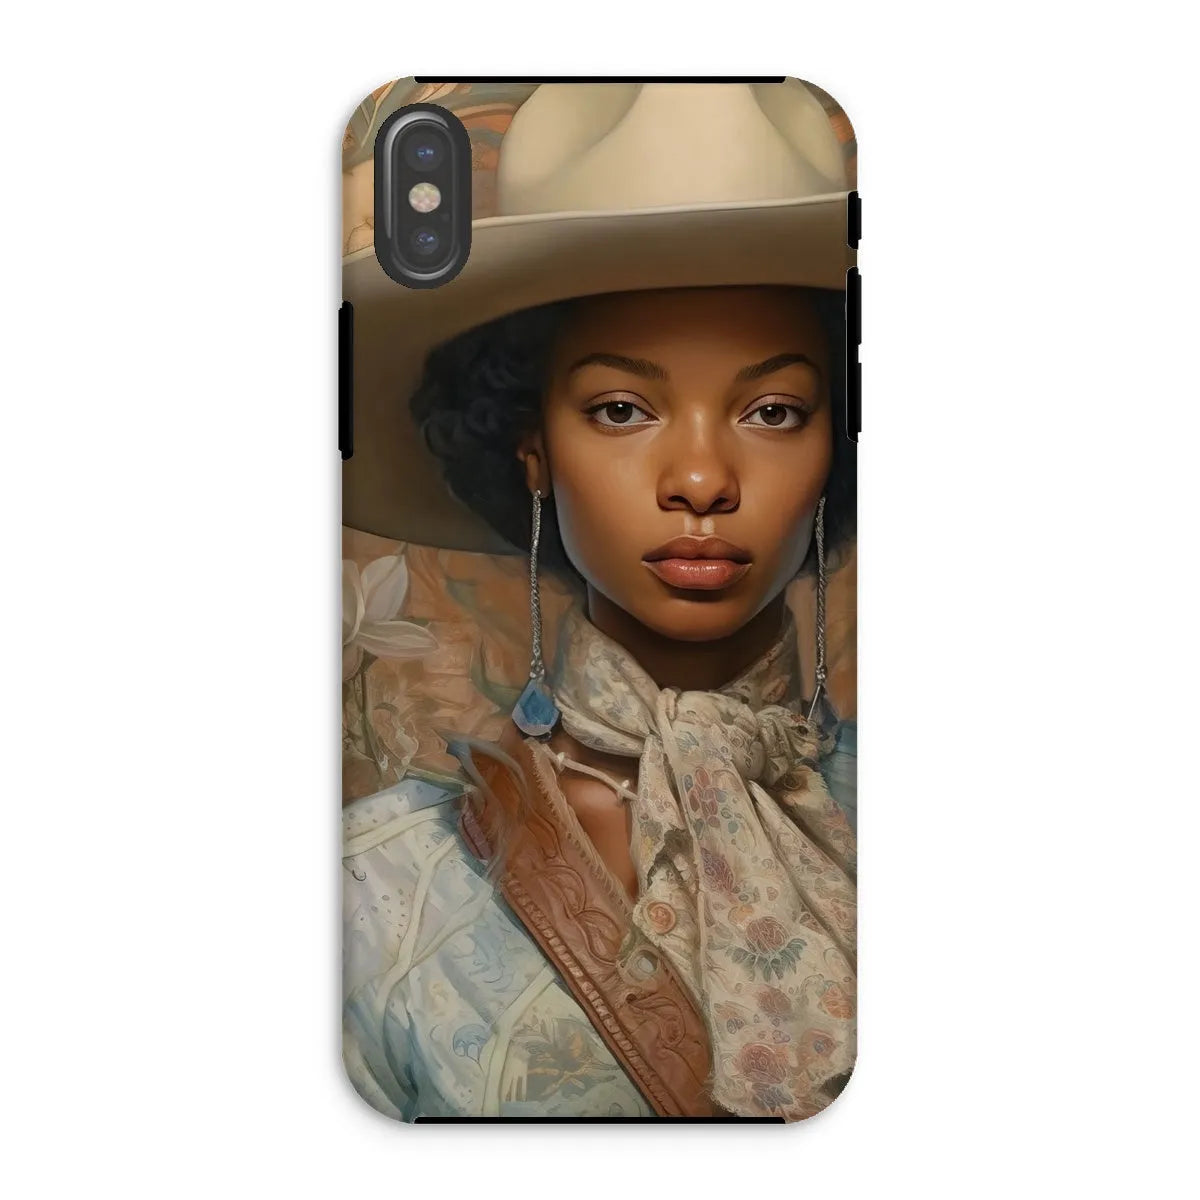 Imani The Lesbian Cowgirl - Sapphic Art Phone Case - Iphone Xs / Matte - Mobile Phone Cases - Aesthetic Art